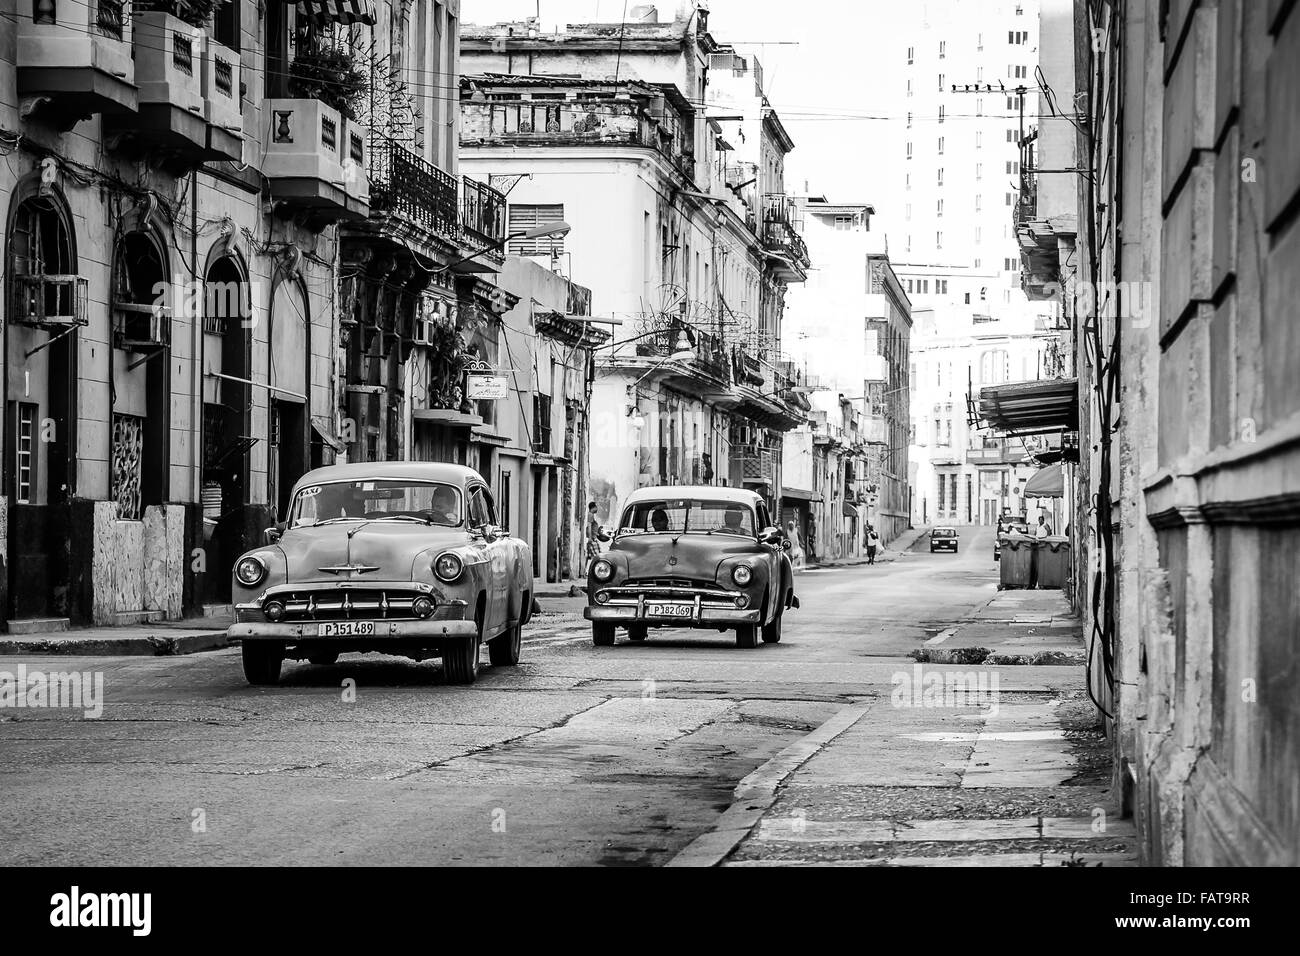 A monochrome image of a duo of classical cars beginning to fill the frame along a typically rugged street in Havana. Stock Photo